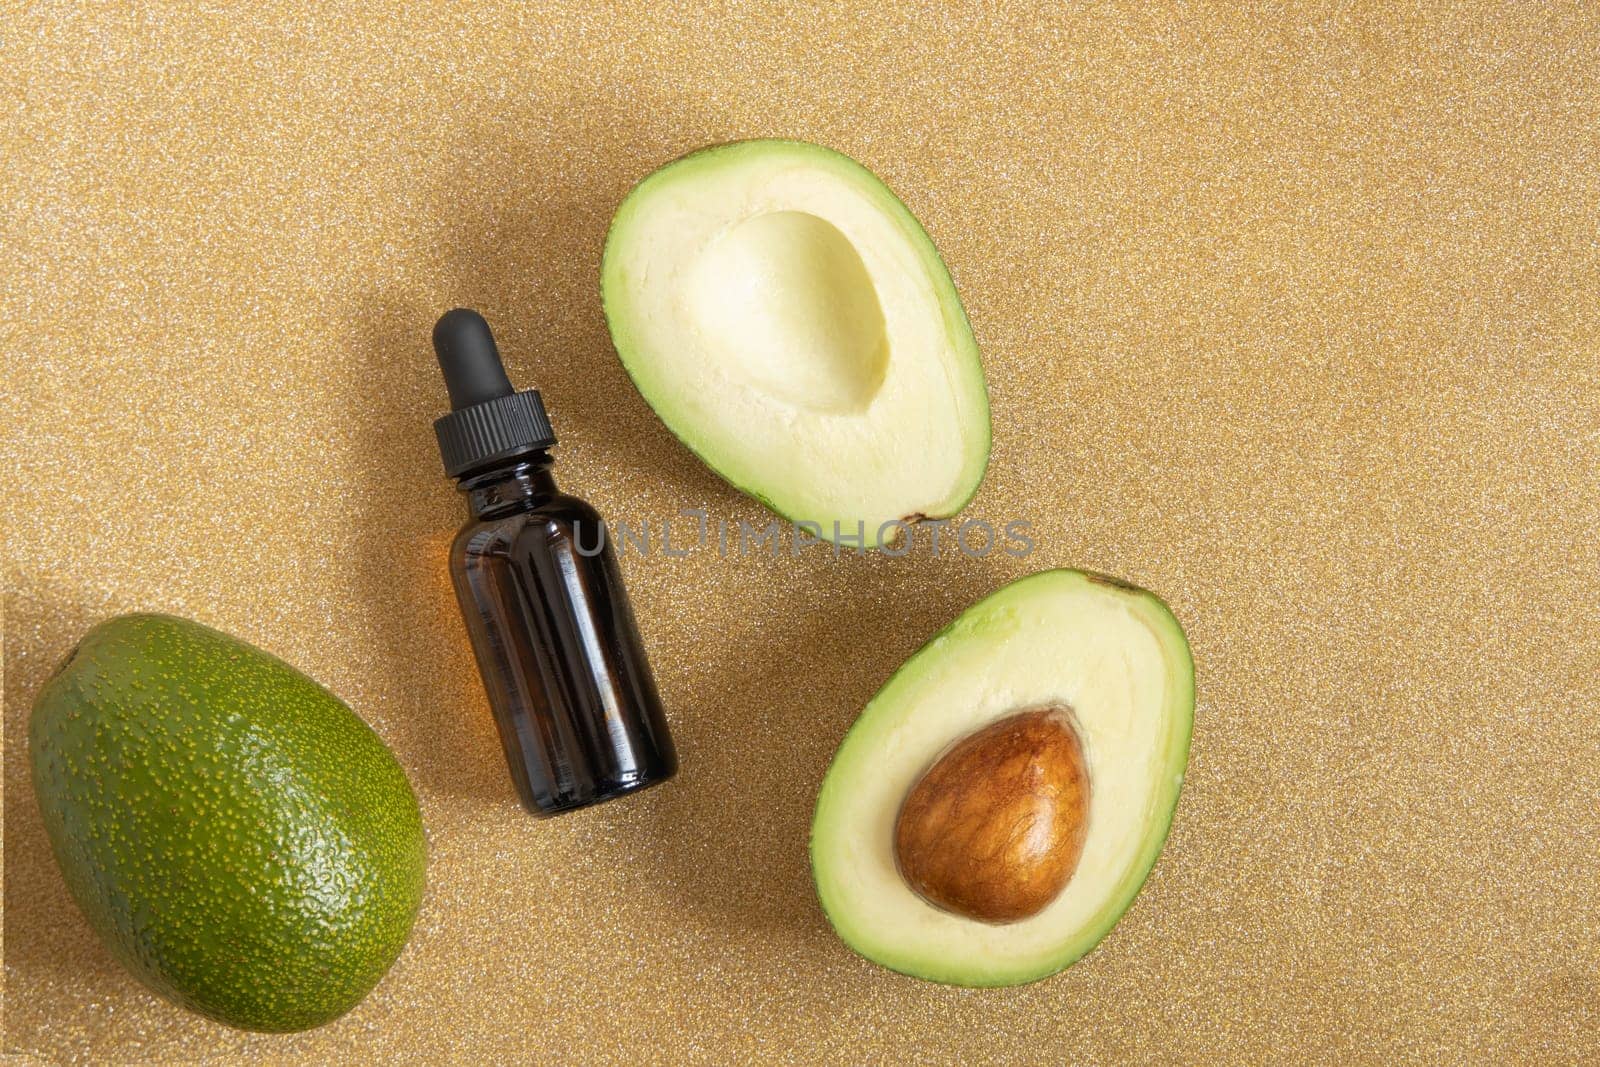 Avocado oil. Essential oil in dark glass bottle on shiny gold background. Avocado for healthy skin and hair. Cosmetics ingridient.